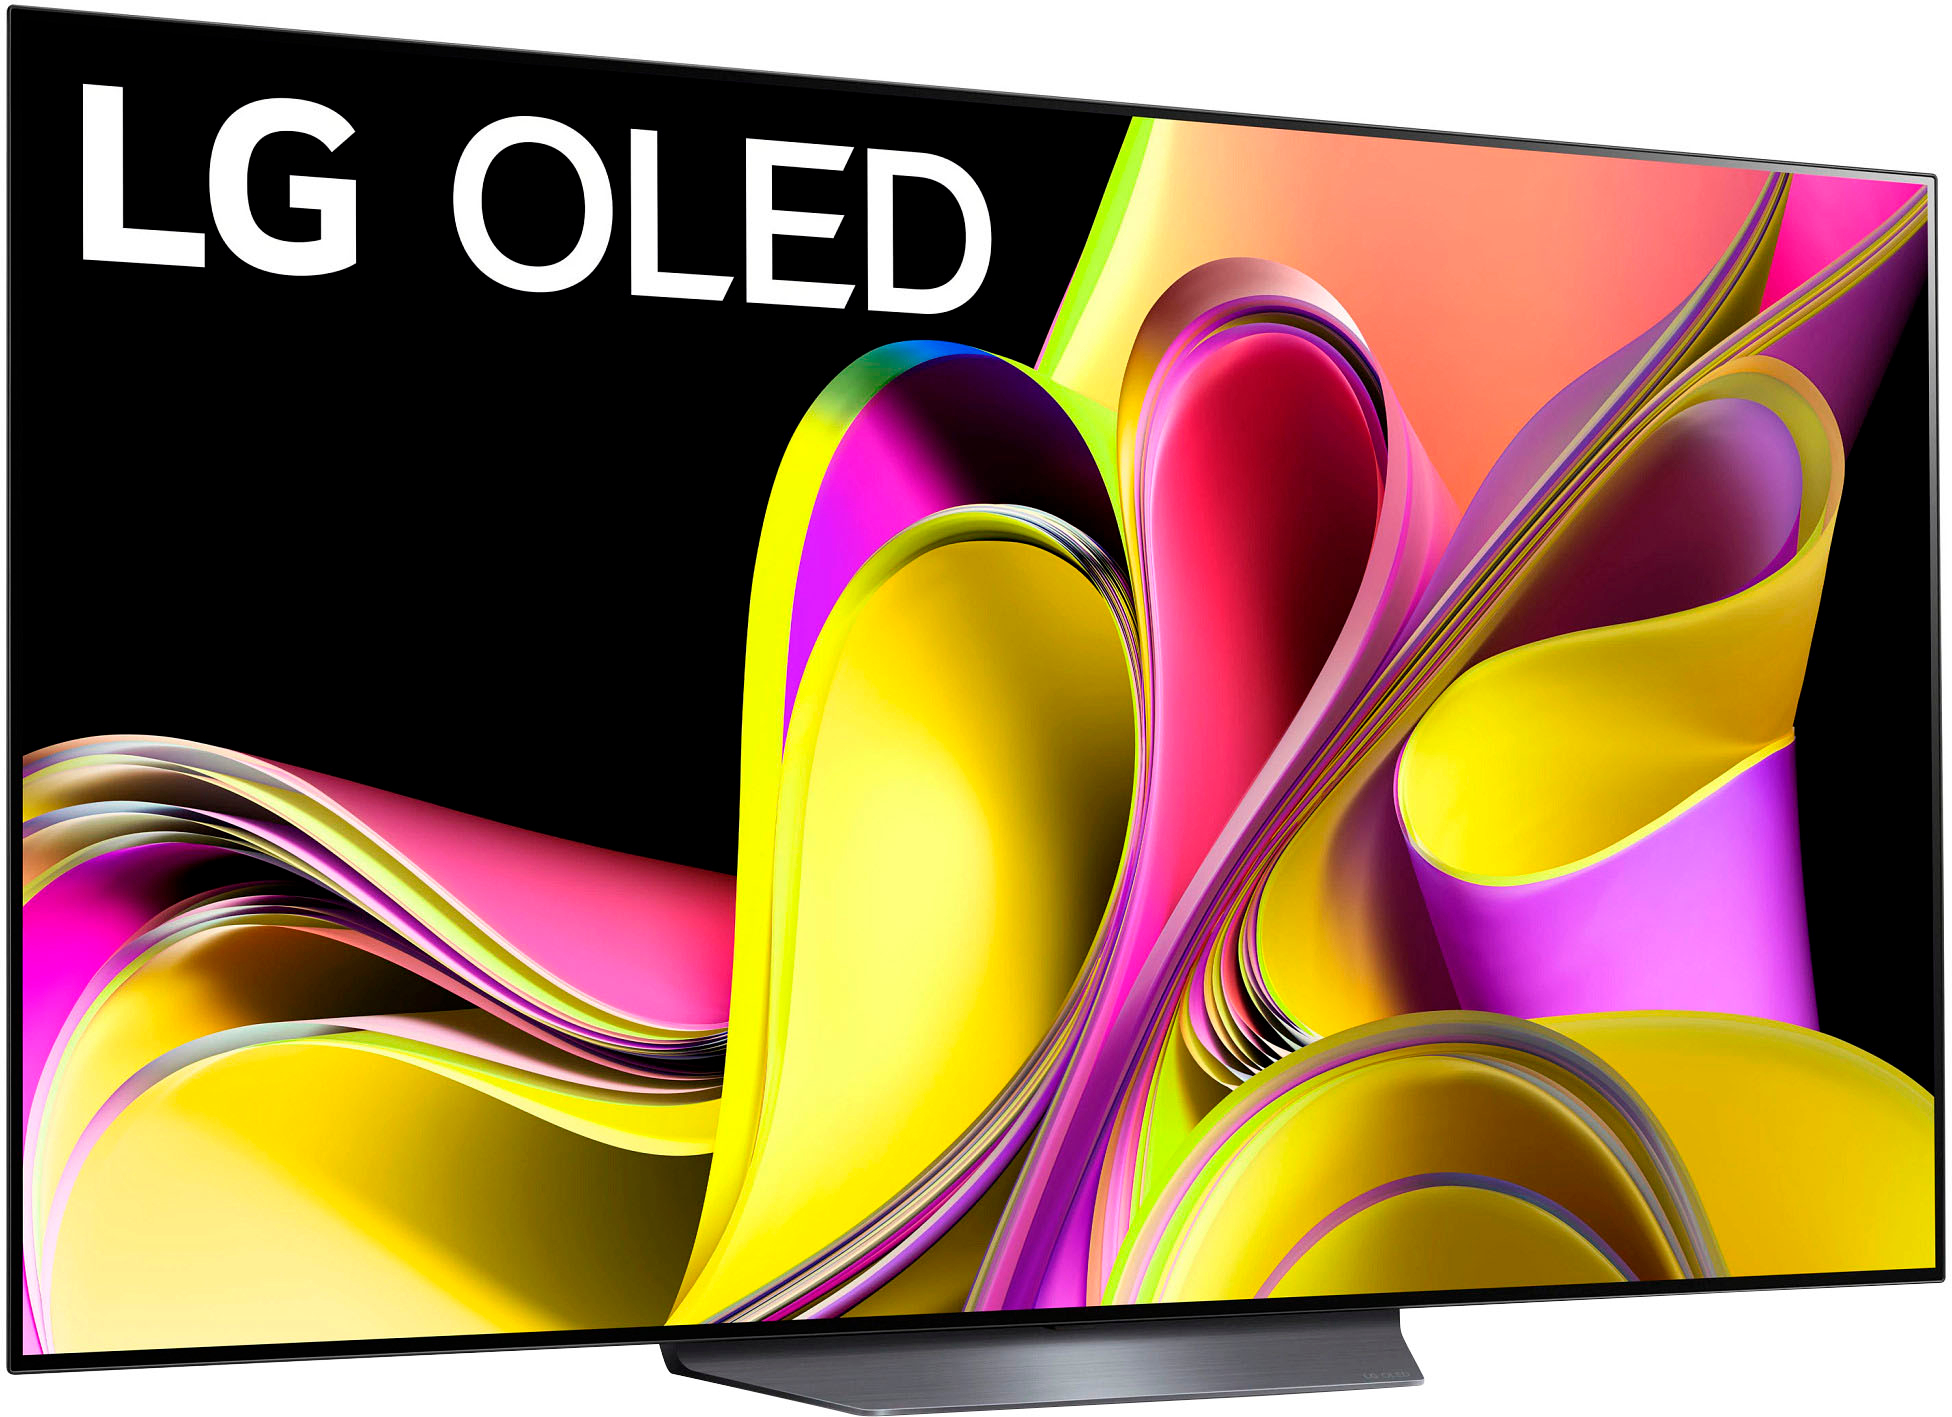 This LG A2 48 for $550 Is the Least Expensive OLED TV We've Ever